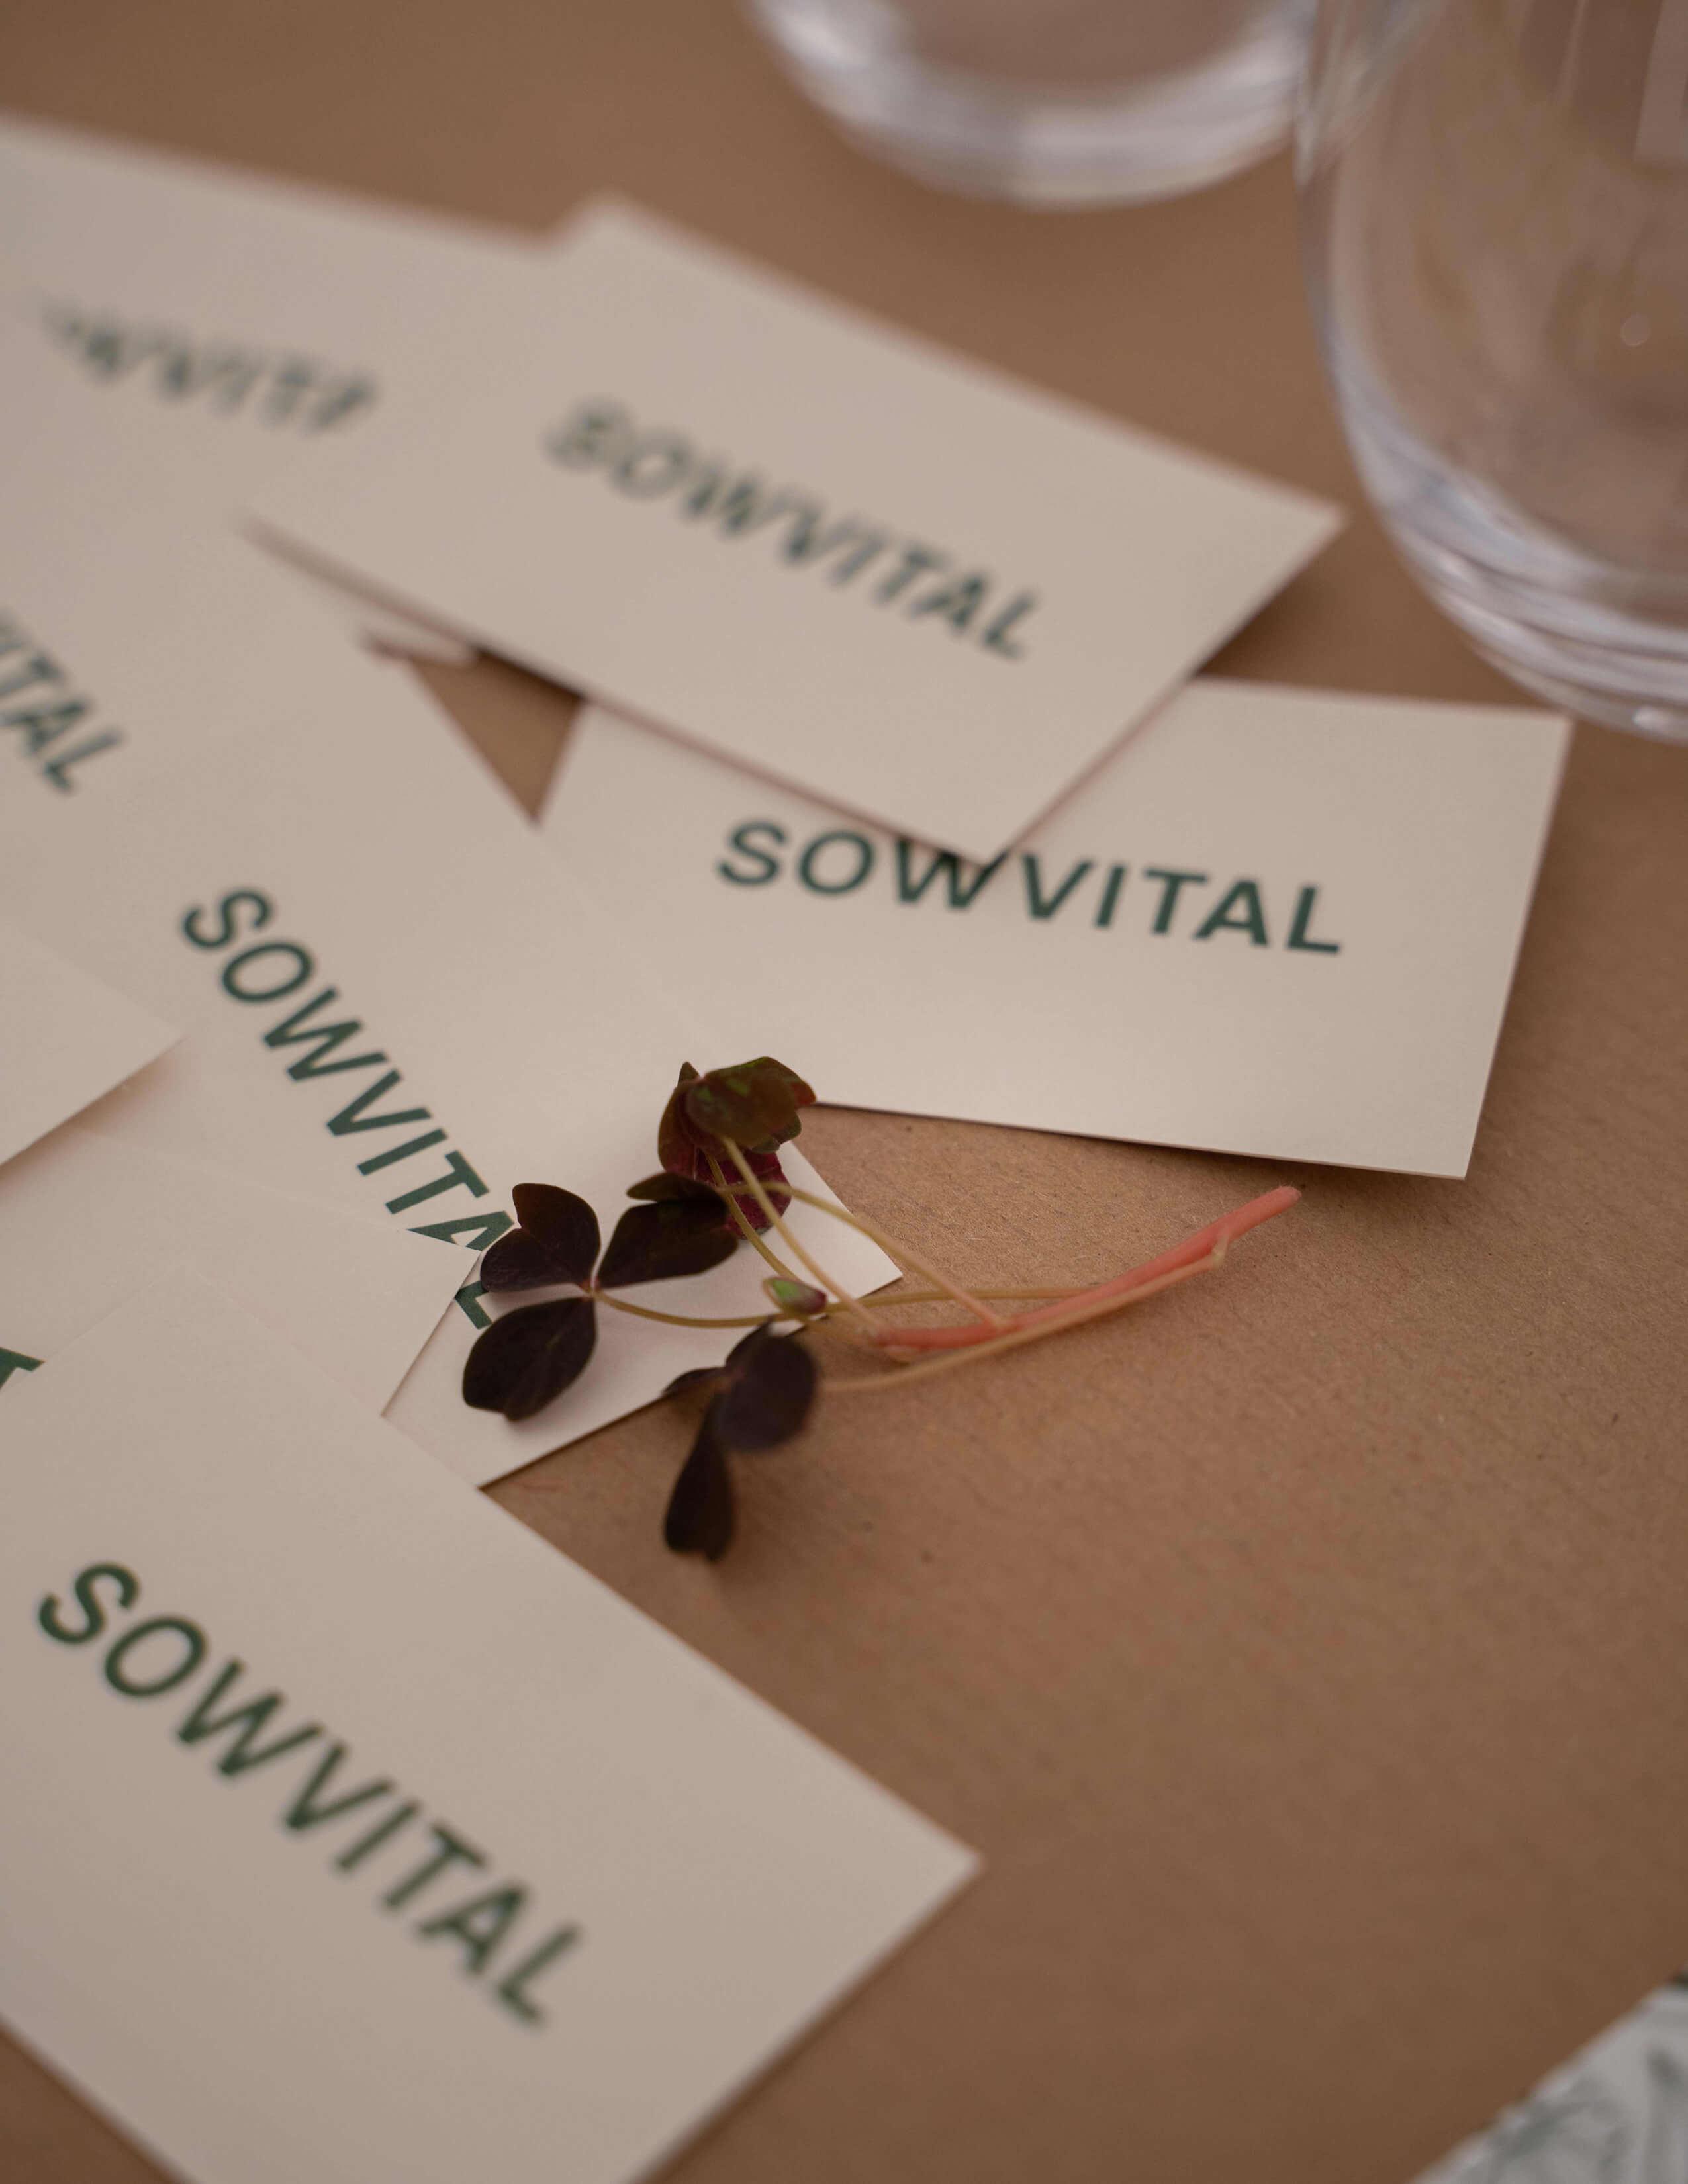 A small plant on a bunch of cards labelled with Sowvital on the surface.